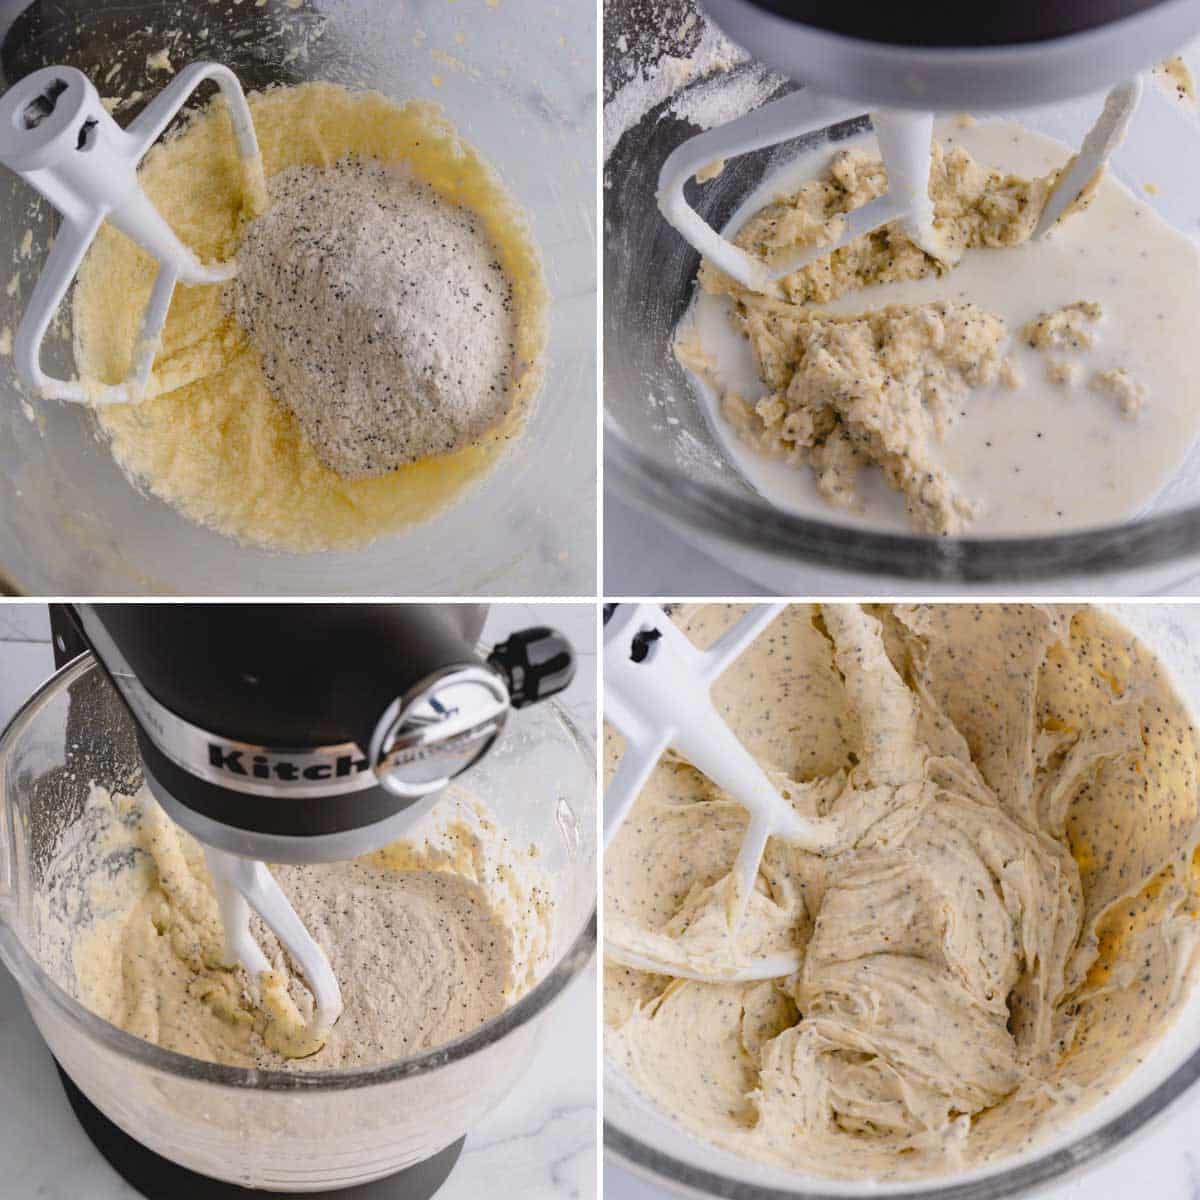 Four images showing the process of making lemon poppy seed muffin batter with a stand mixer.